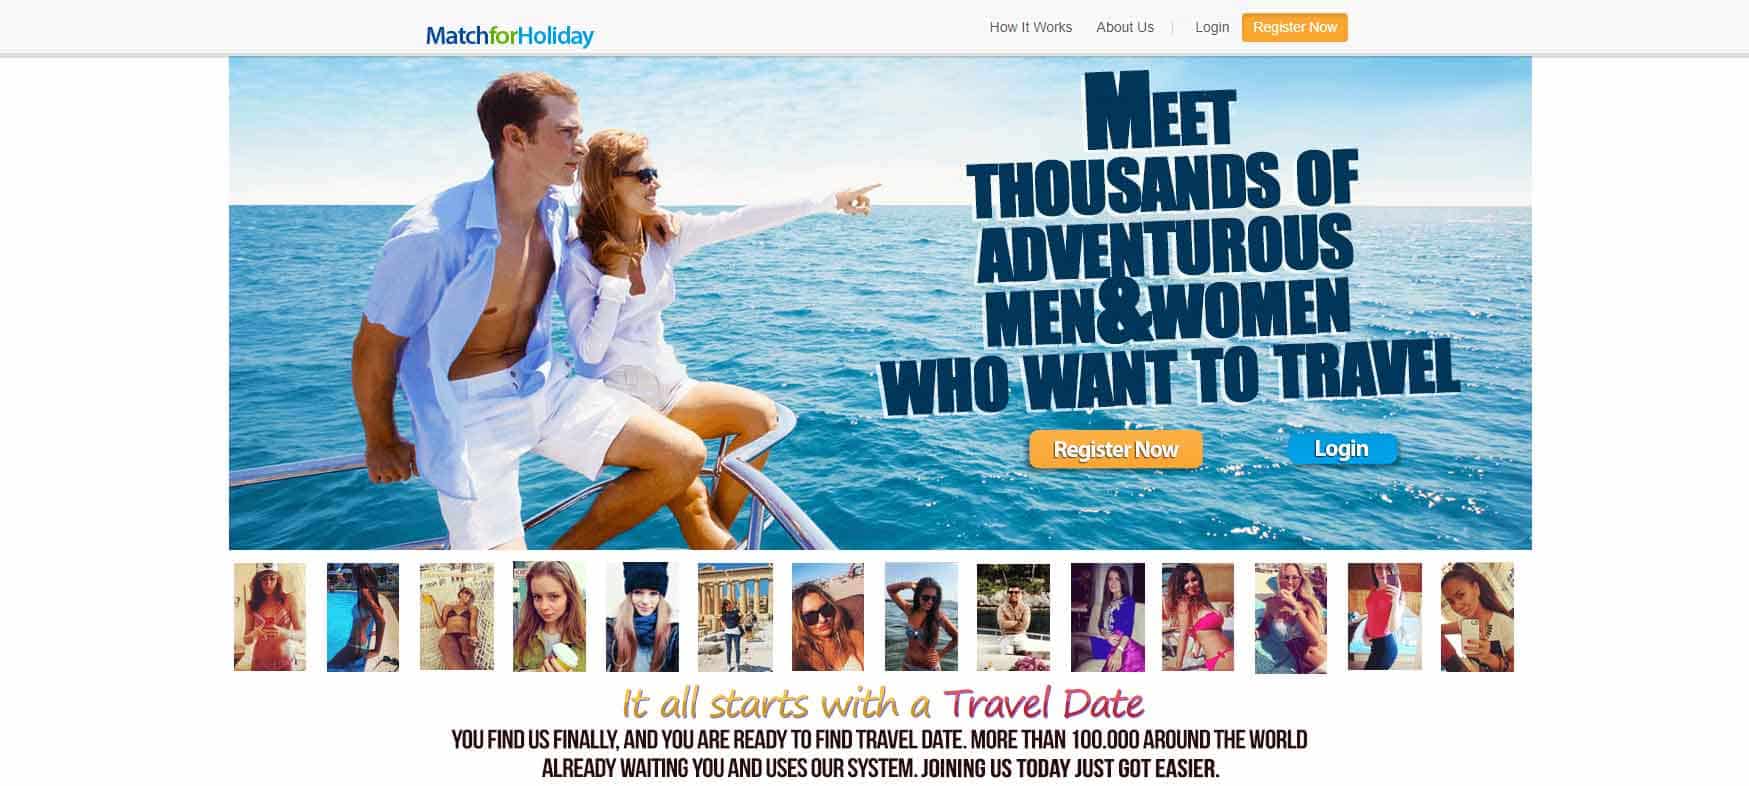 Match for Holiday home page image for international travel and dating site review